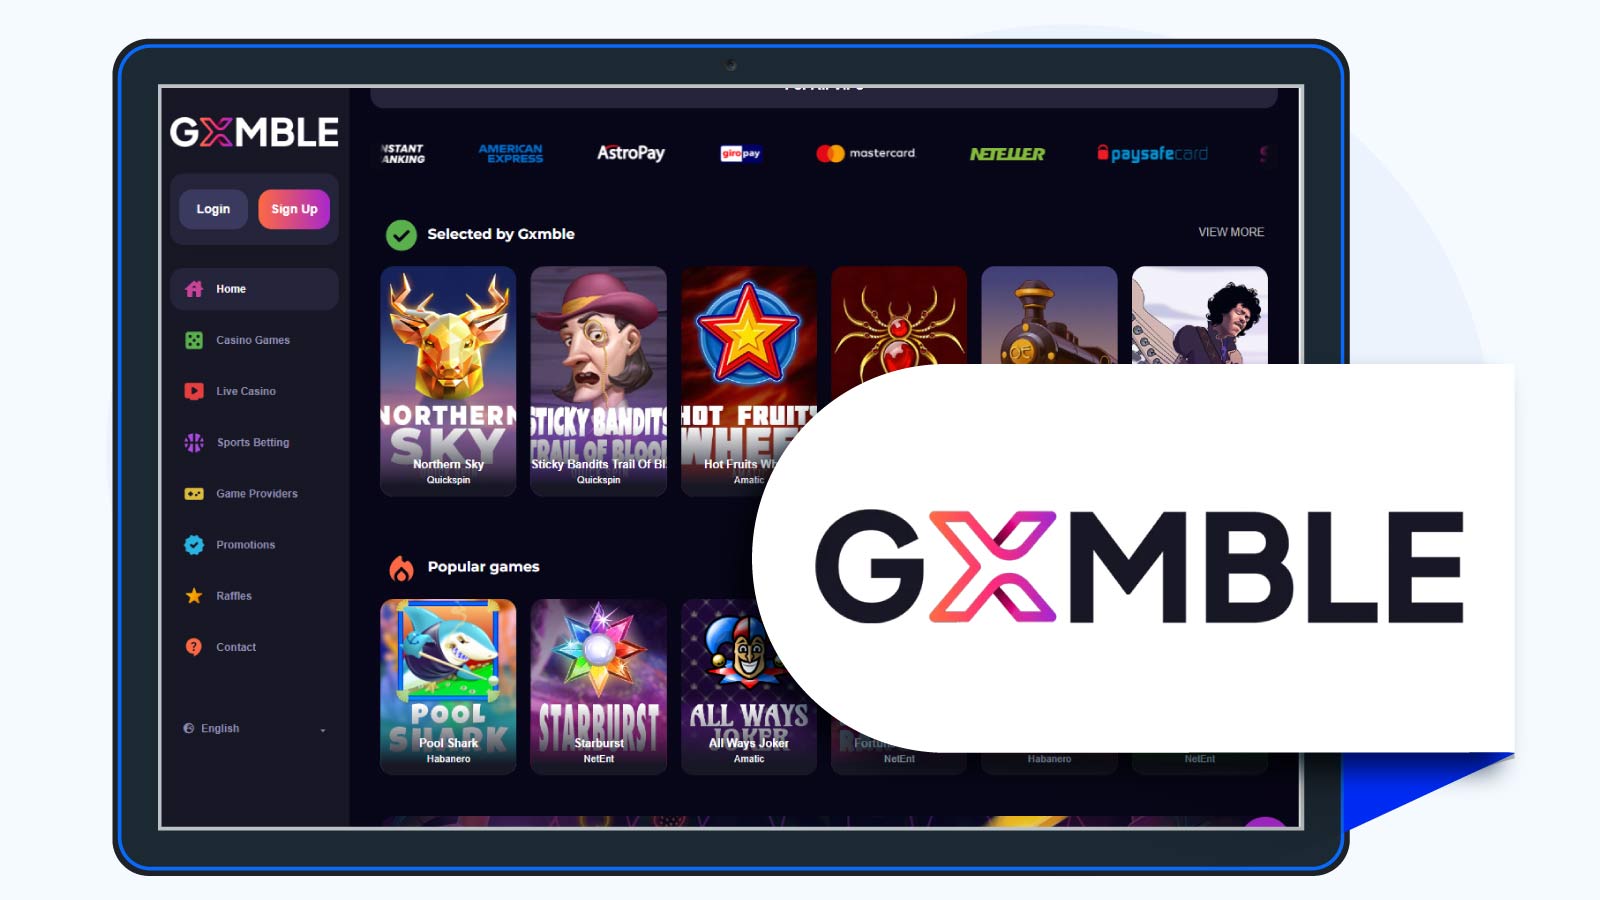 GXmble – No Cashout Limit Low Wagering Casino